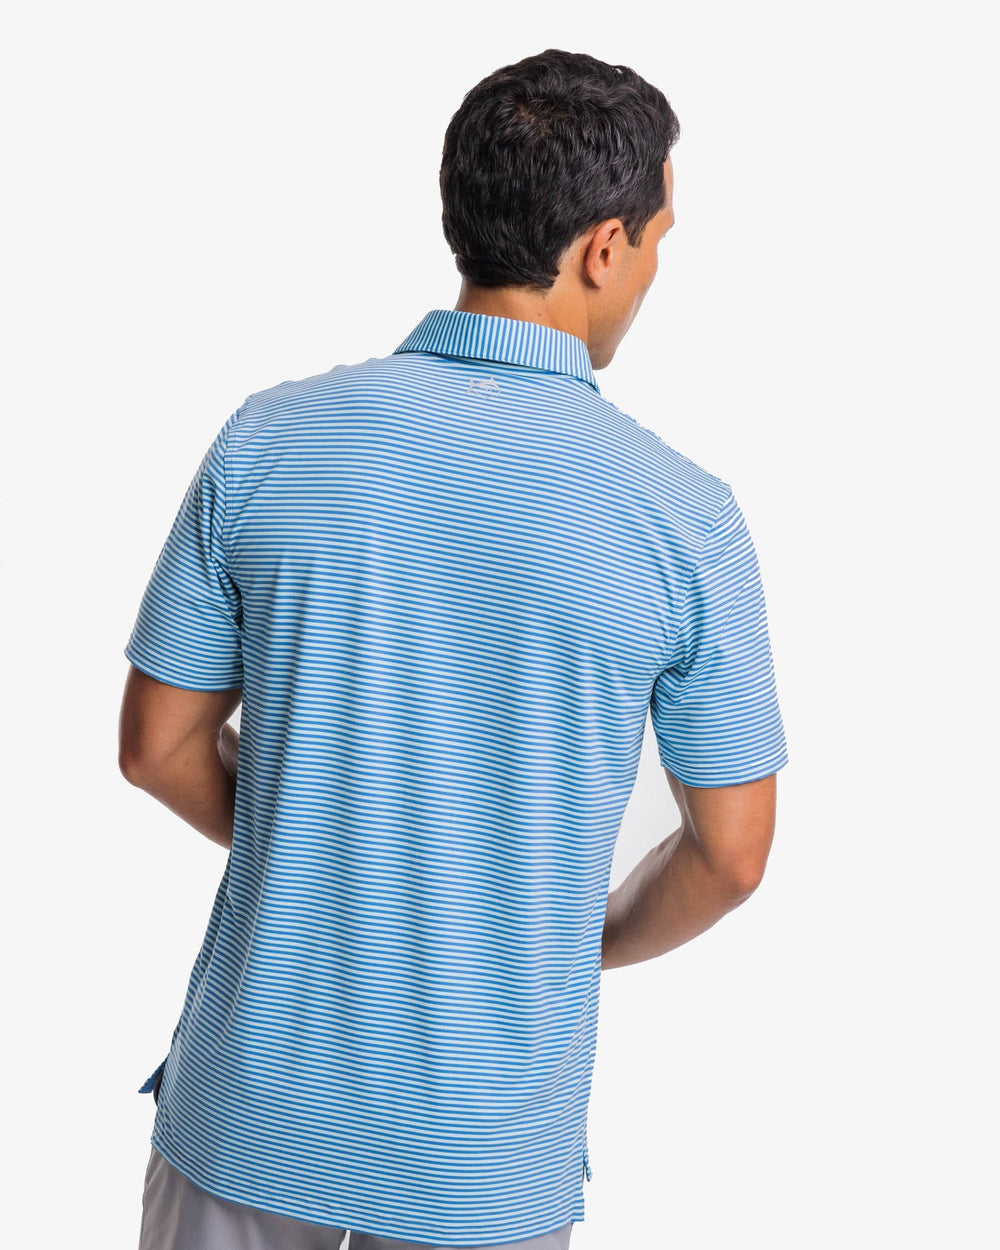 The back view of the Southern Tide Shores Stripe brrr eeze Performance Polo Shirt by Southern Tide - Baltic Teal